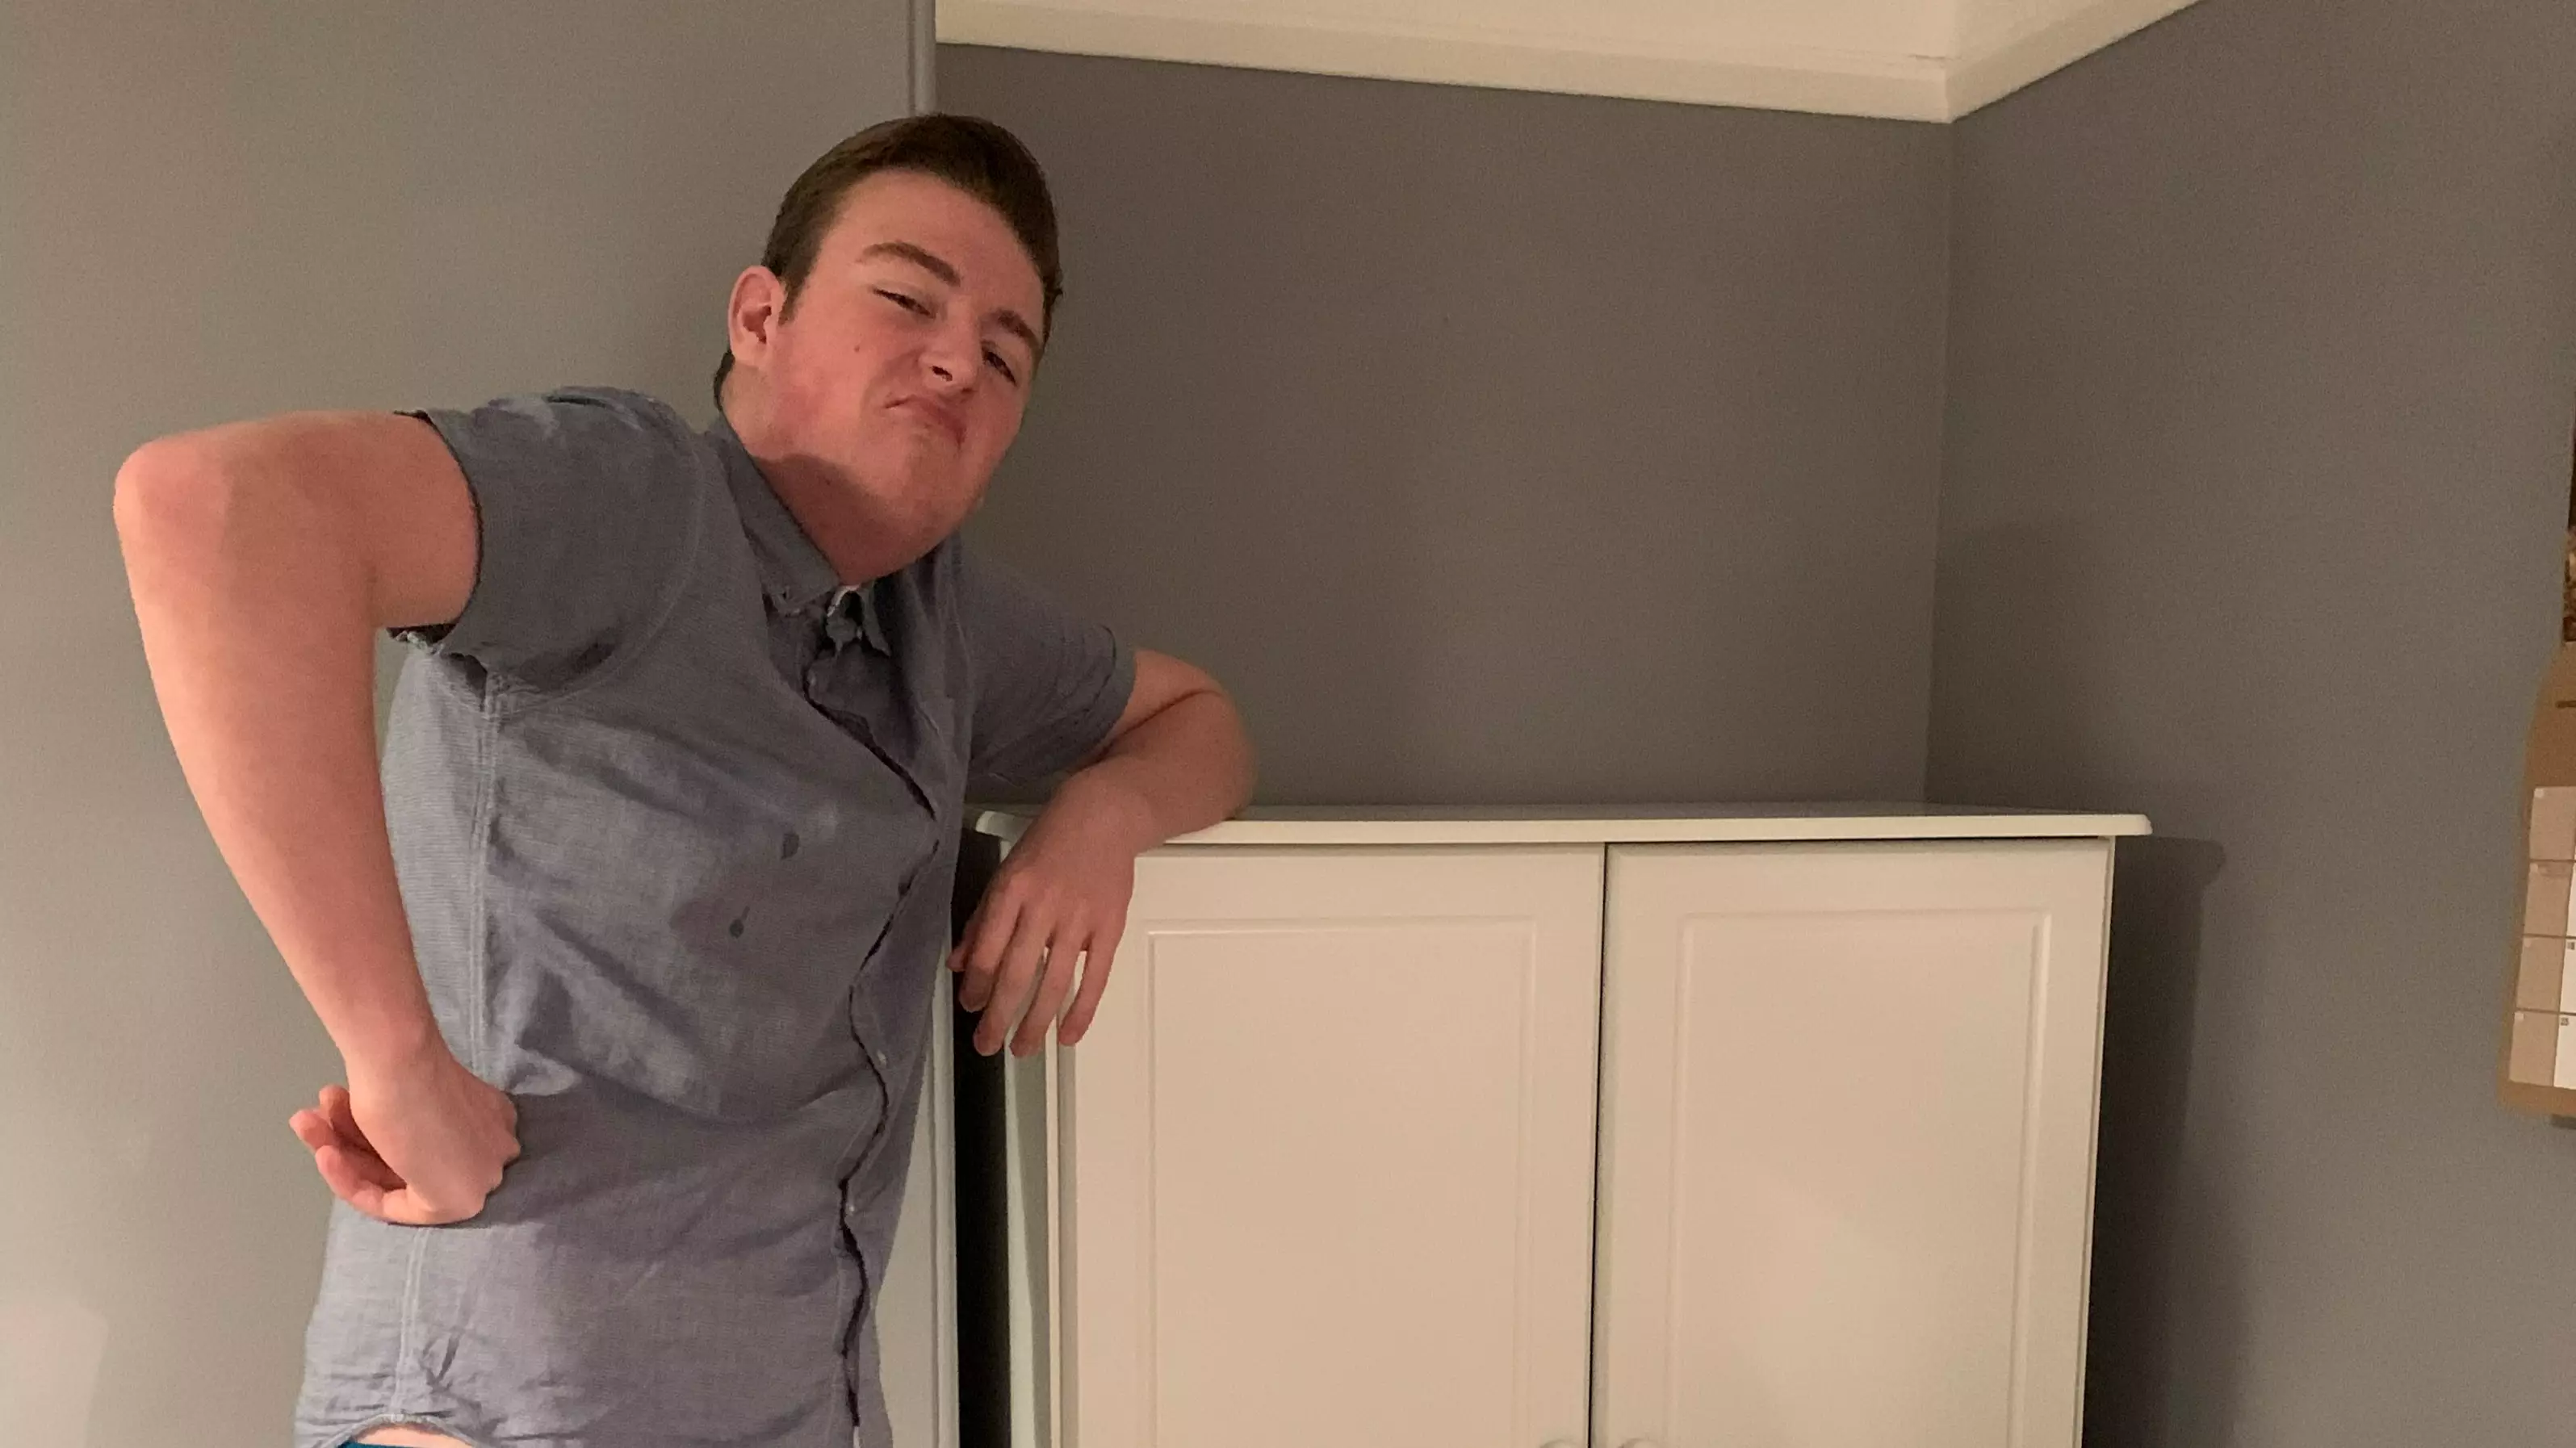 Mum In Hysterics Over Size Of New Wardrobe She Bought For 6ft 2in Son